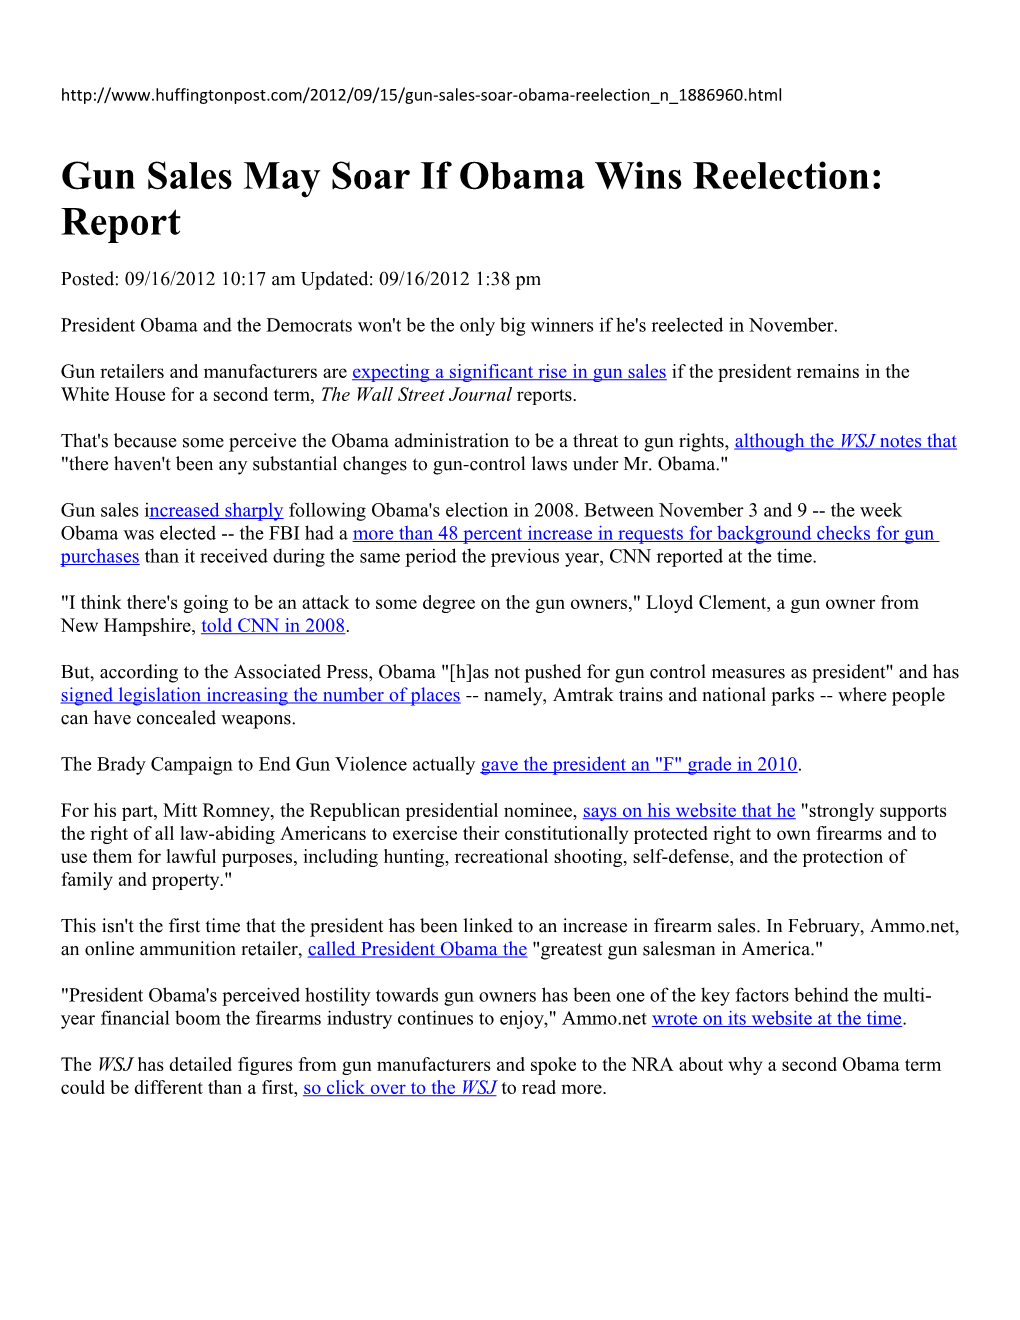 Gun Sales May Soar If Obama Wins Reelection: Report